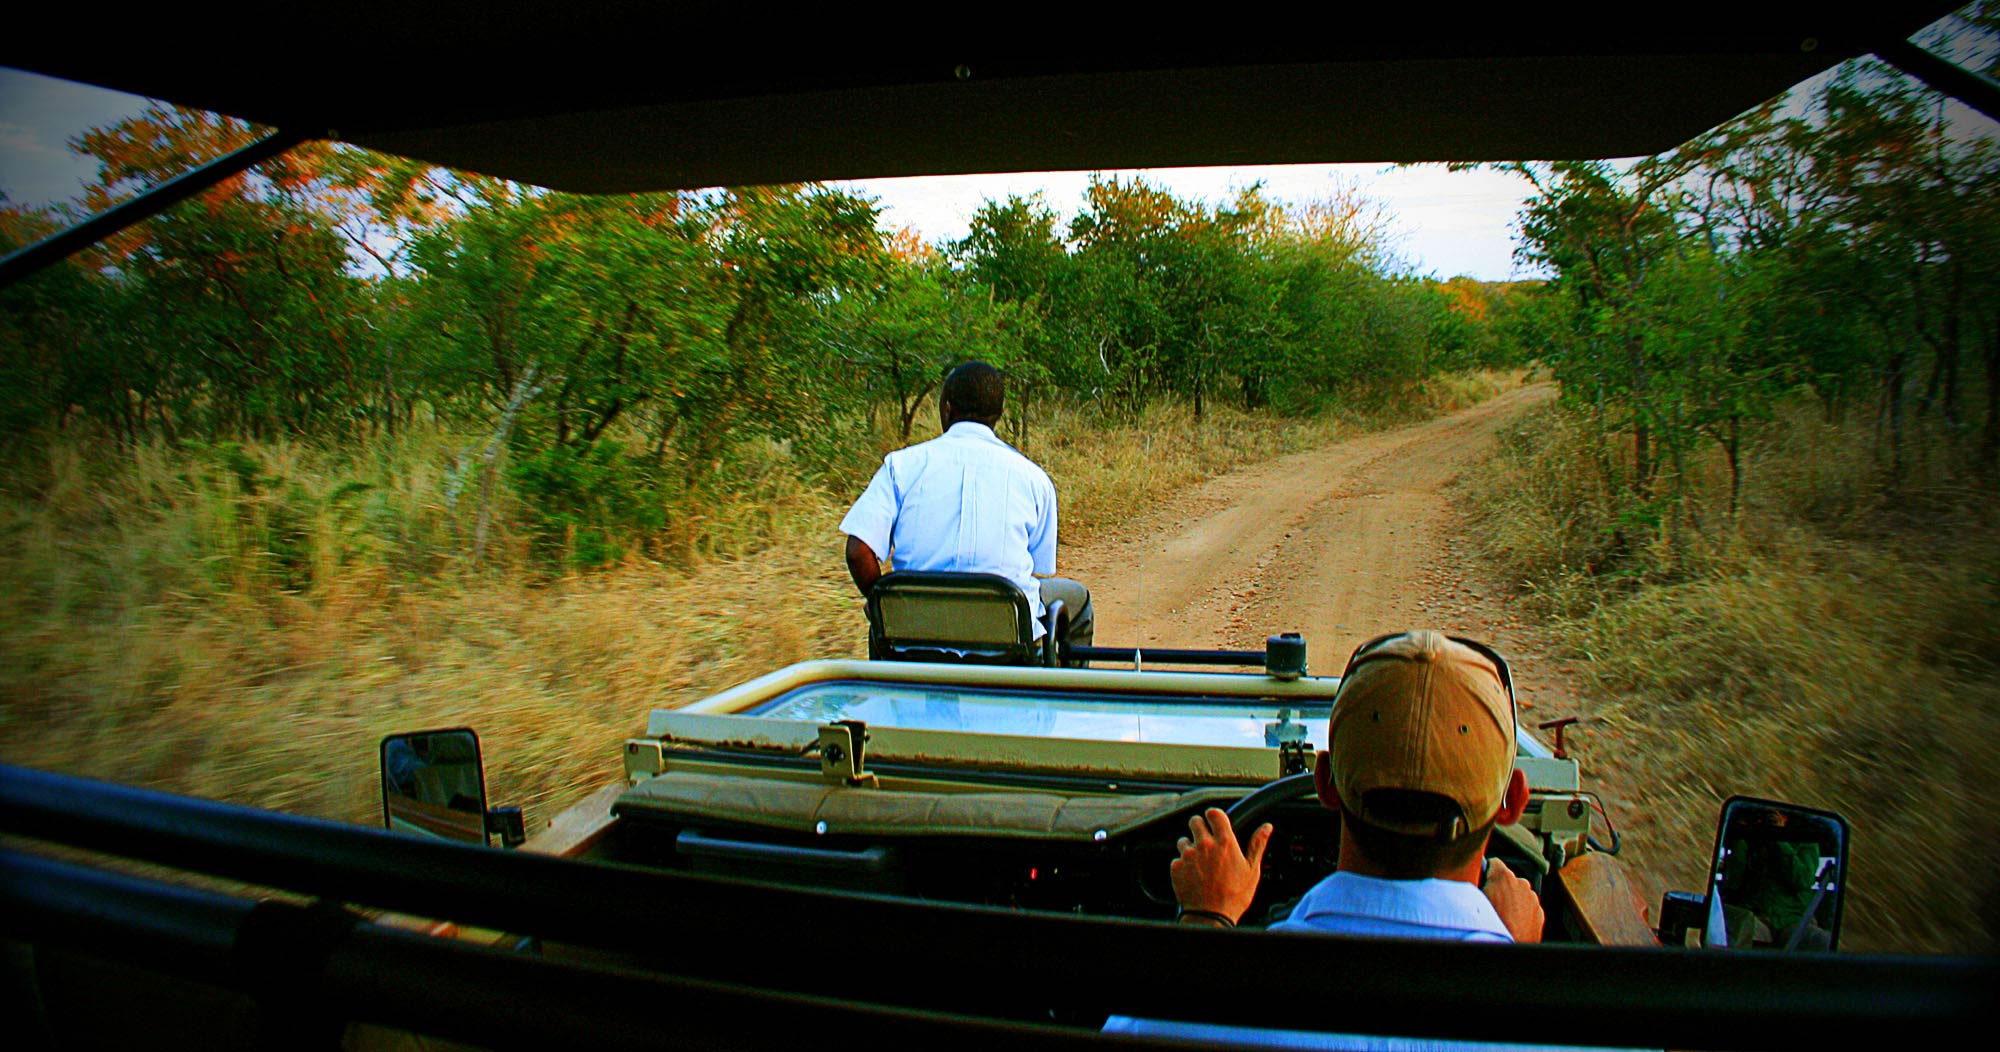 Honeyguide Camp game drive